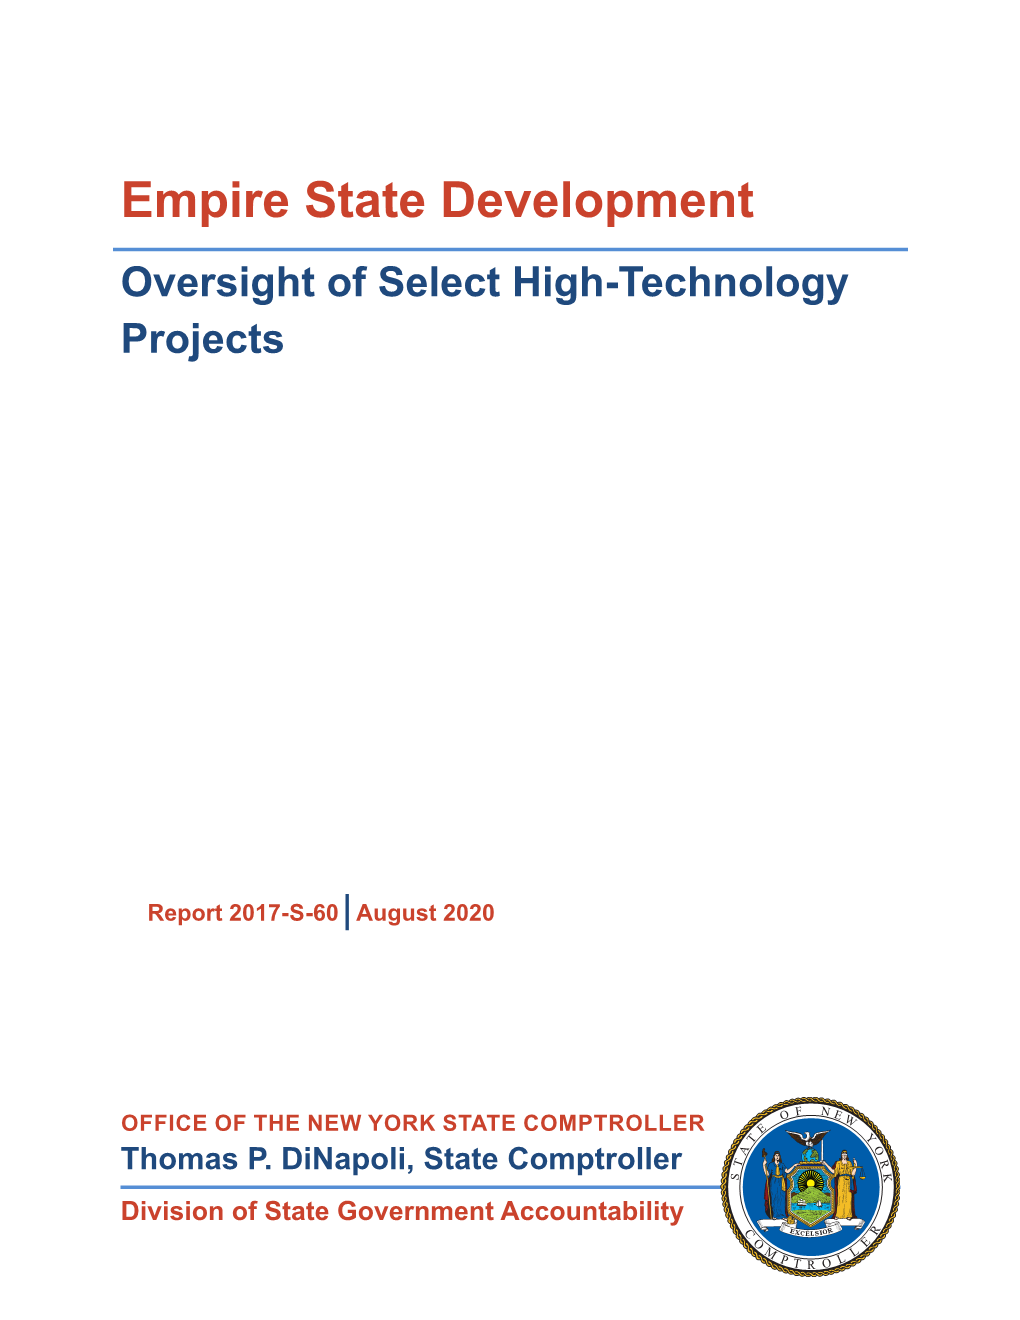 Empire State Development Oversight of Select High-Technology Projects